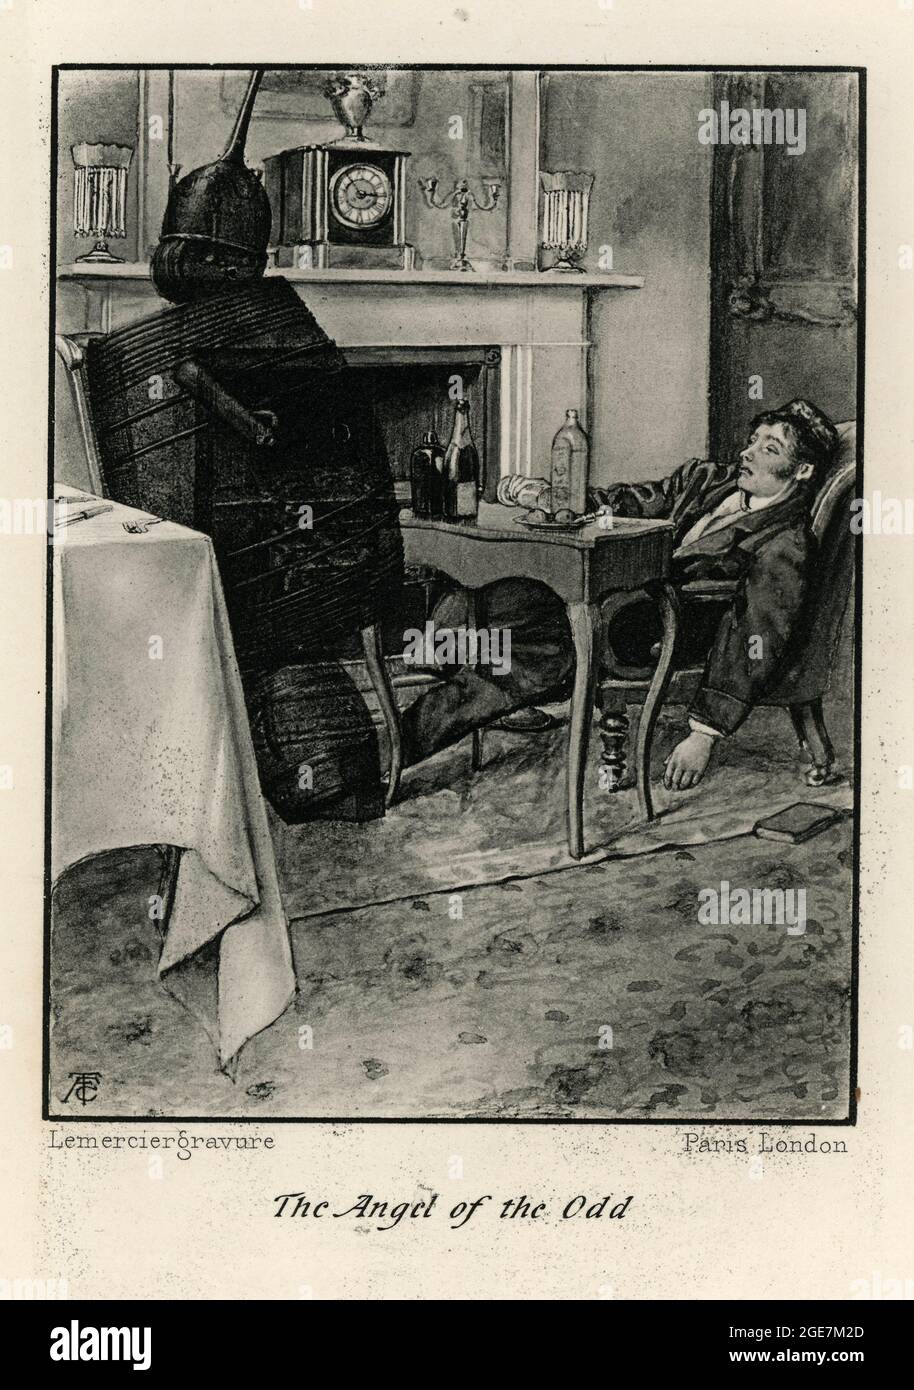 Vintage illustration from The Angel of the Odd by Edgar Allan Poe. Drunk man slumped in a chair Stock Photo